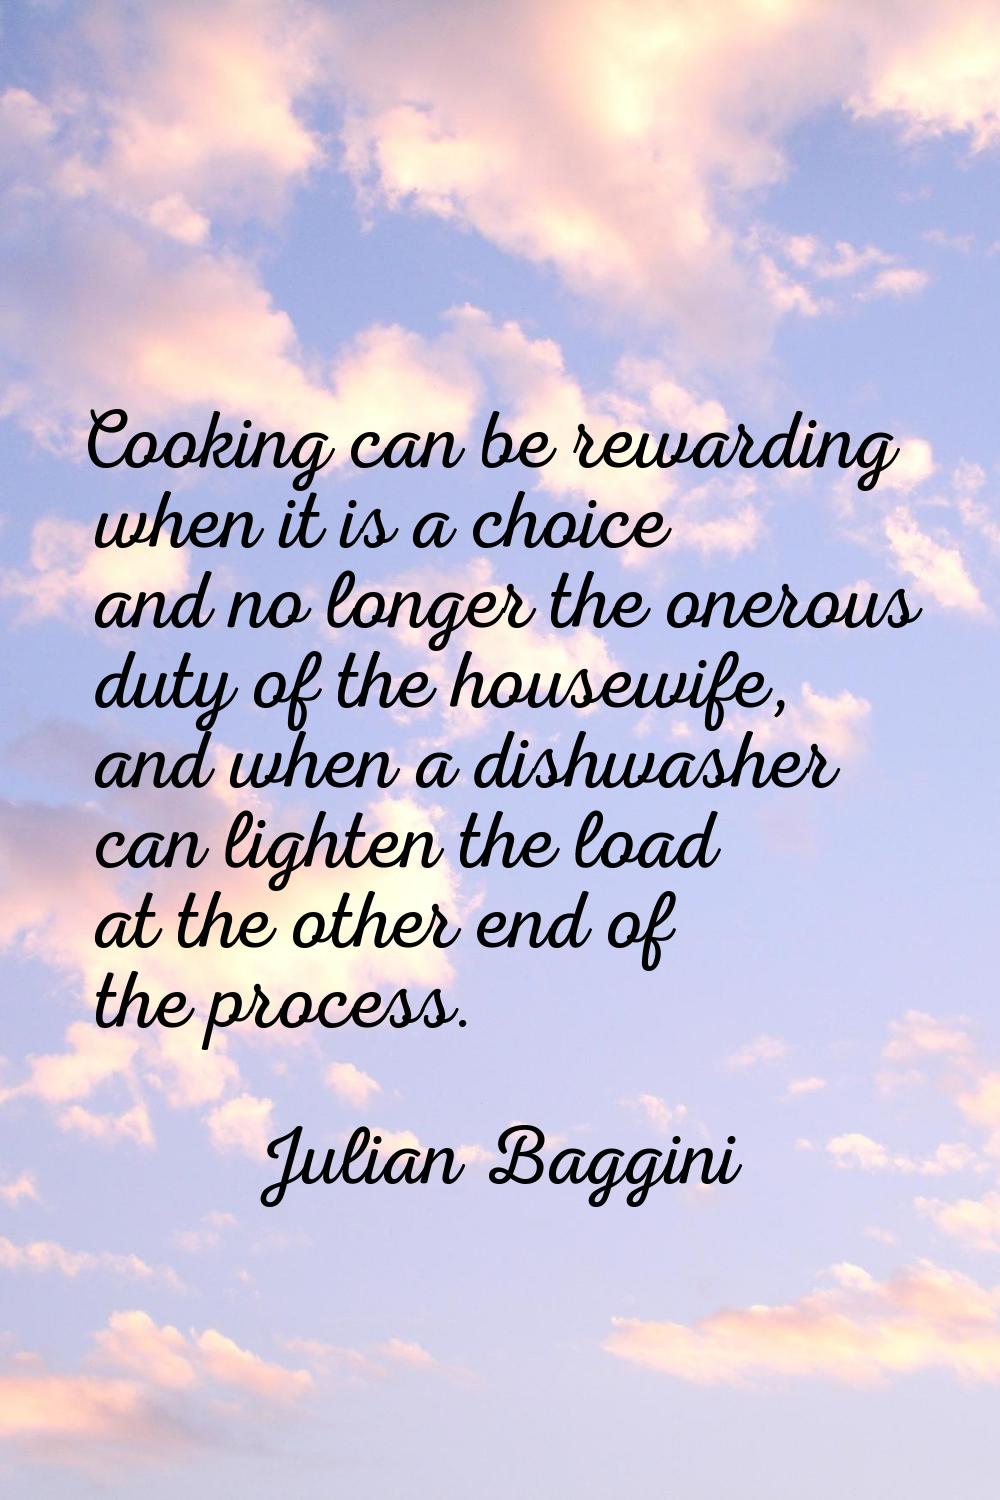 Cooking can be rewarding when it is a choice and no longer the onerous duty of the housewife, and w